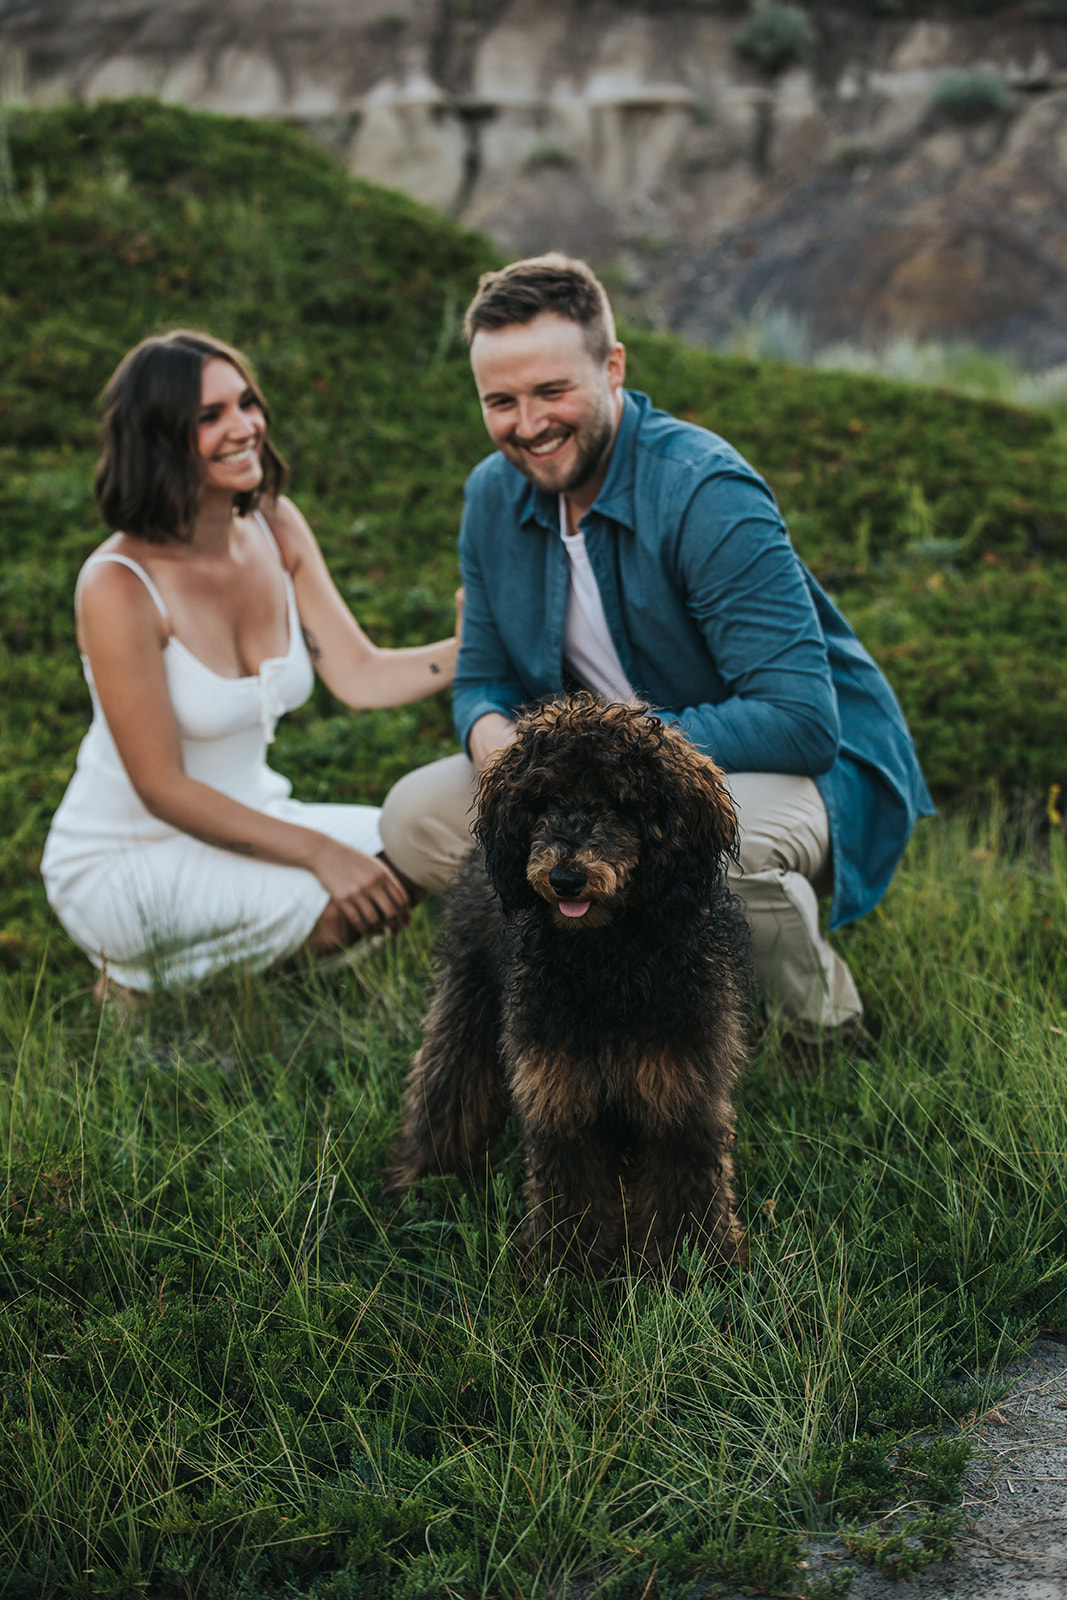 A couple's summer Engagement Photography Session at Horseshoe Canyon with puppy